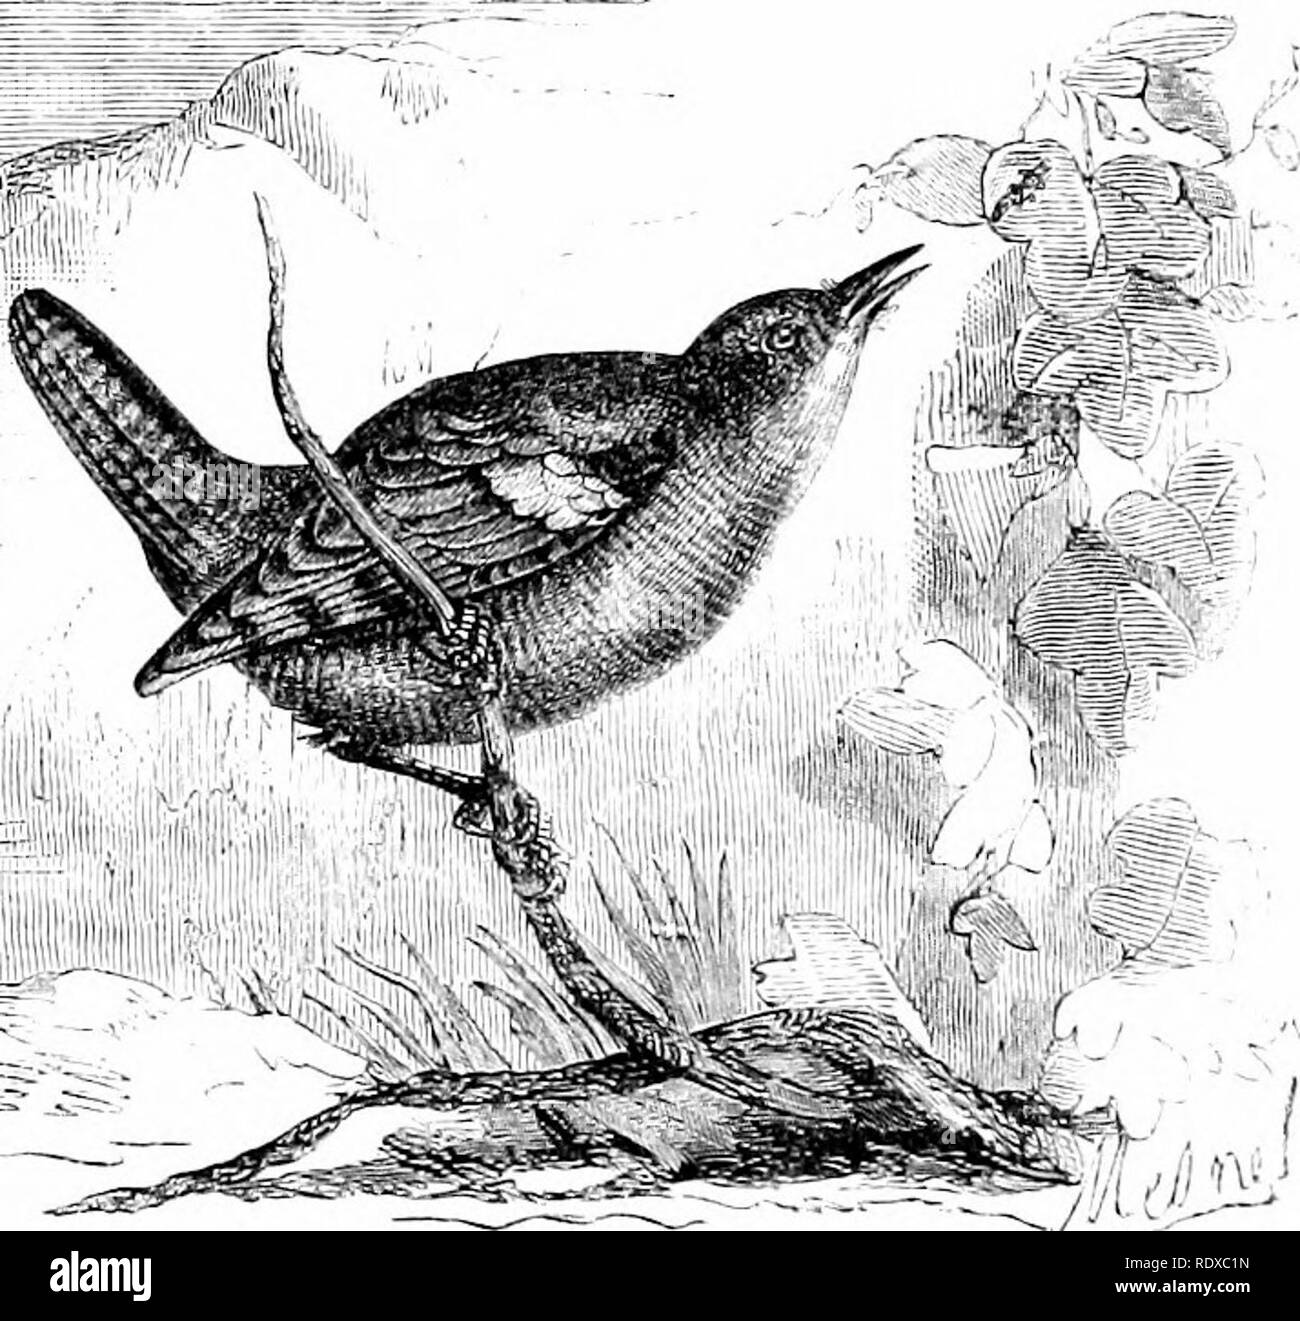 . Reptiles and birds : a popular account of their various orders : with a description of the habits and economy of the most interesting . Birds; Reptiles. ViS PASSEEINKS. The Goldon-crested Kinglet [Motucillu rajidus, Linn.), Pig. 249, iiibabit.s the woods and thickets of the cold and temperate regions of the earth, where, among the twigs, with great agility it searches for insects, on which it feeds. AVhile thus occupied it emits a single shrill, feeble note, too often accepted by heart- less boys as a tell-tale of its whereabouts. The European &quot;Wren ('J)vi]IoJi/tes europaiis, Cuvier), F Stock Photo